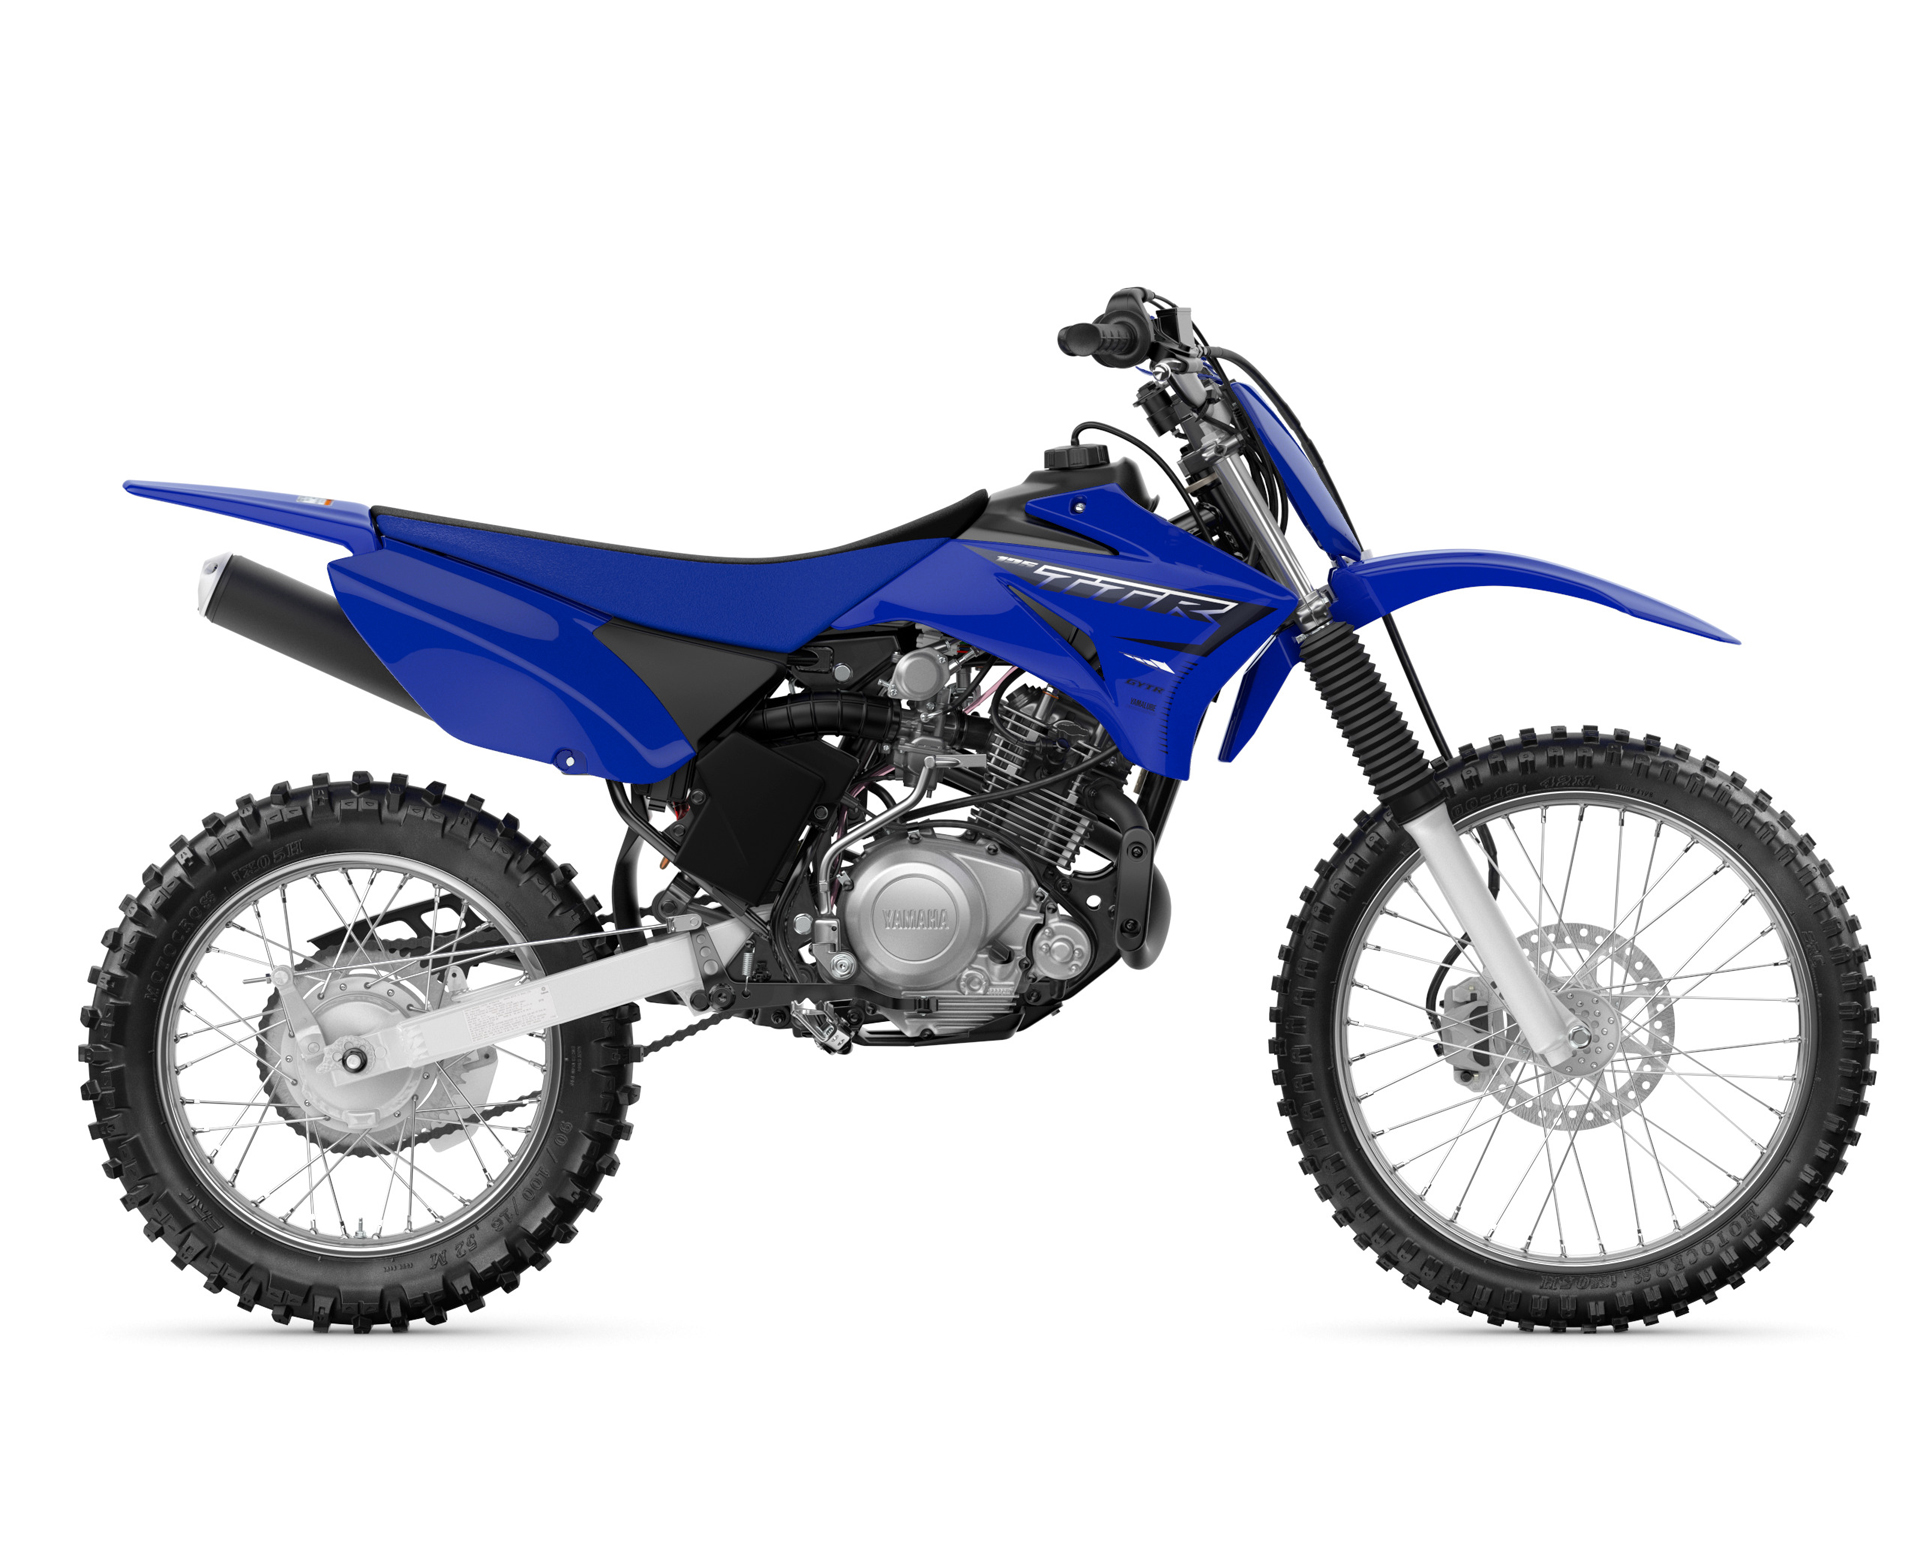 Thumbnail of your customized TT-R 125 2023